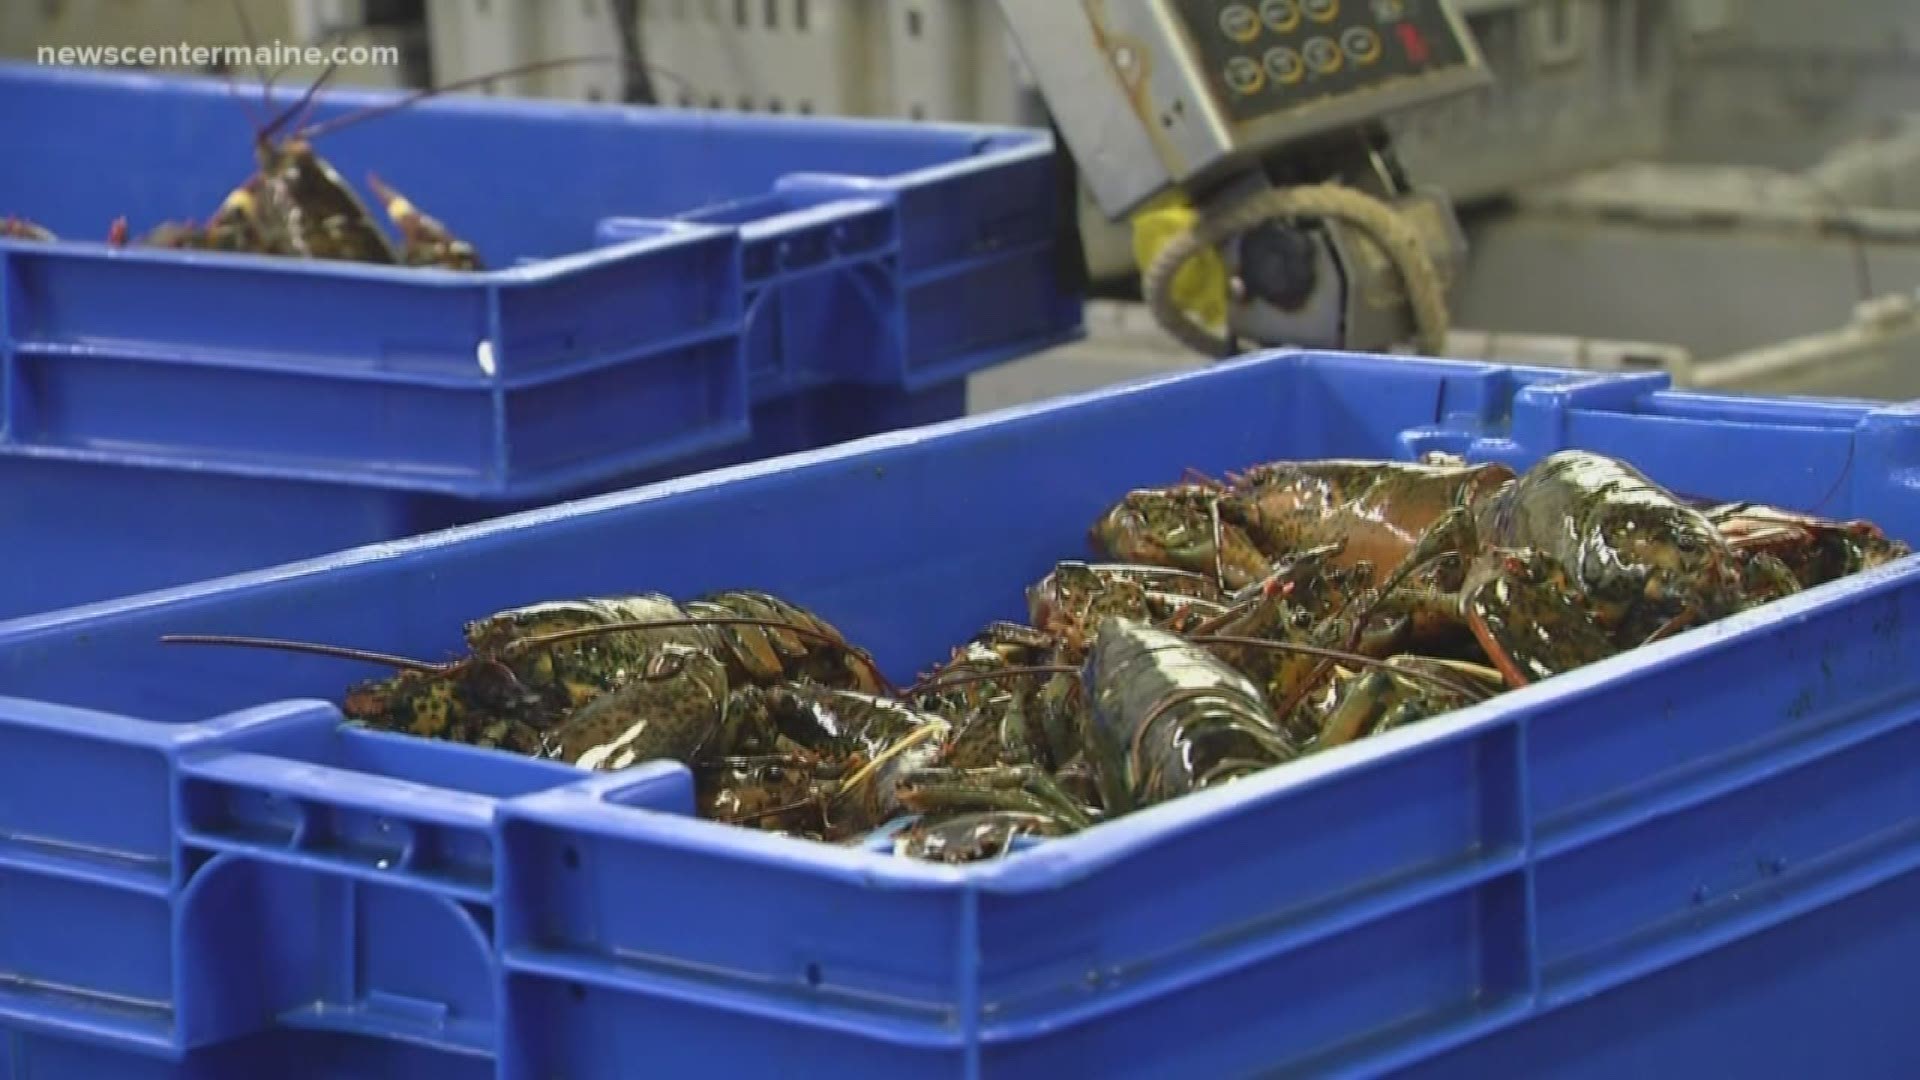 While there are reports the price of lobster has dropped significantly in New England, it appears whole sale prices in Maine are just slightly lower or average.